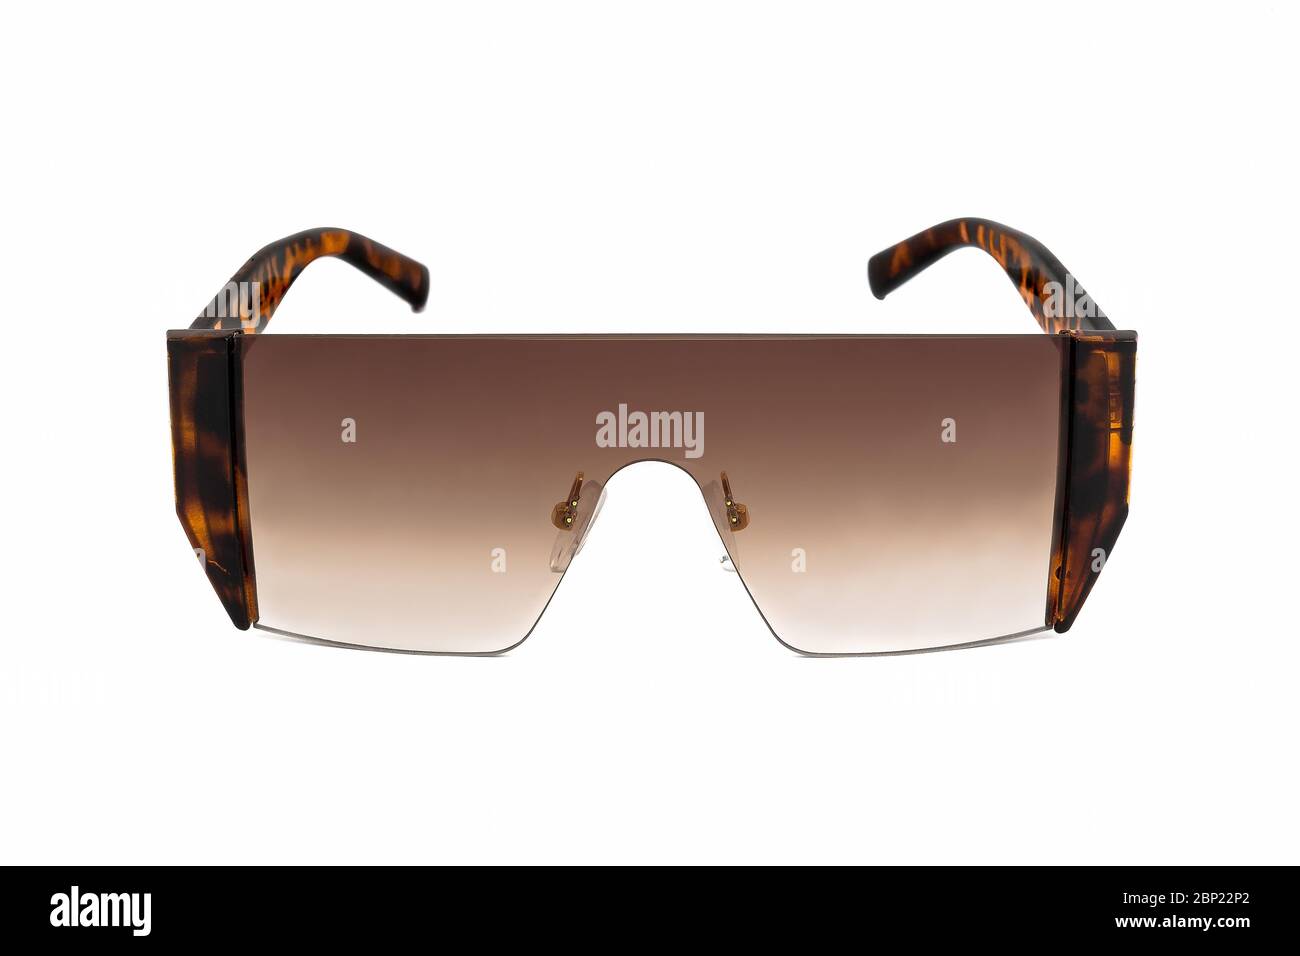 Rap star hip hop style rimless sunglasses with brown color gradient mono  lens, flat top and leopard texture earpiece, isolated on white background  Stock Photo - Alamy